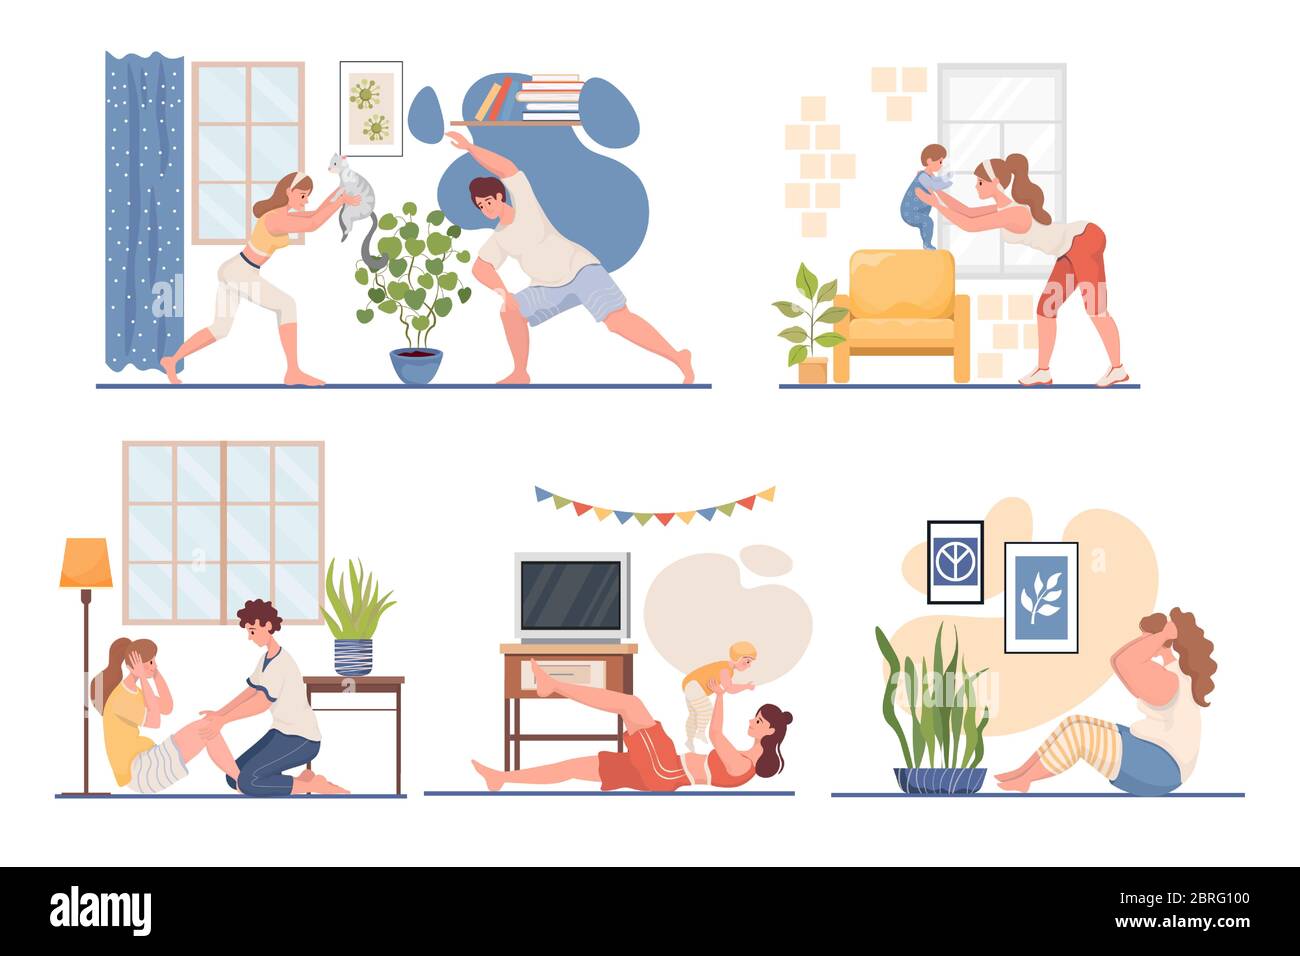 https://c8.alamy.com/comp/2BRG100/happy-young-men-and-women-doing-sport-at-home-vector-flat-illustration-fitness-workout-in-the-living-room-during-coronavirus-outbreak-stay-home-and-do-yoga-healthy-lifestyle-concept-2BRG100.jpg